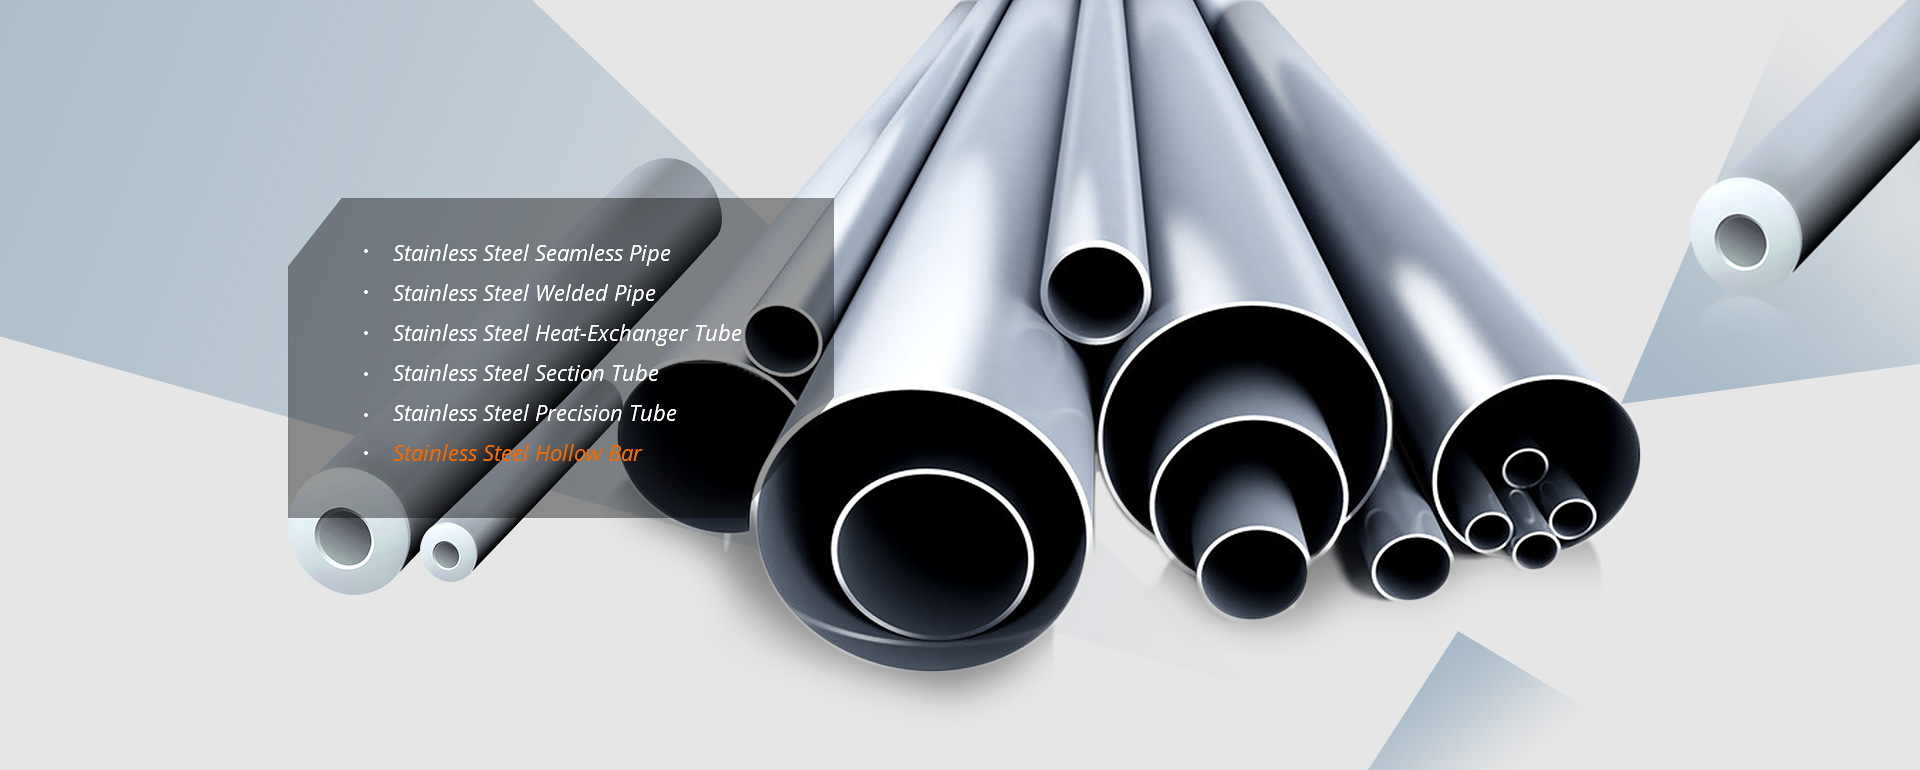 Stainless steel pipe&tube banner